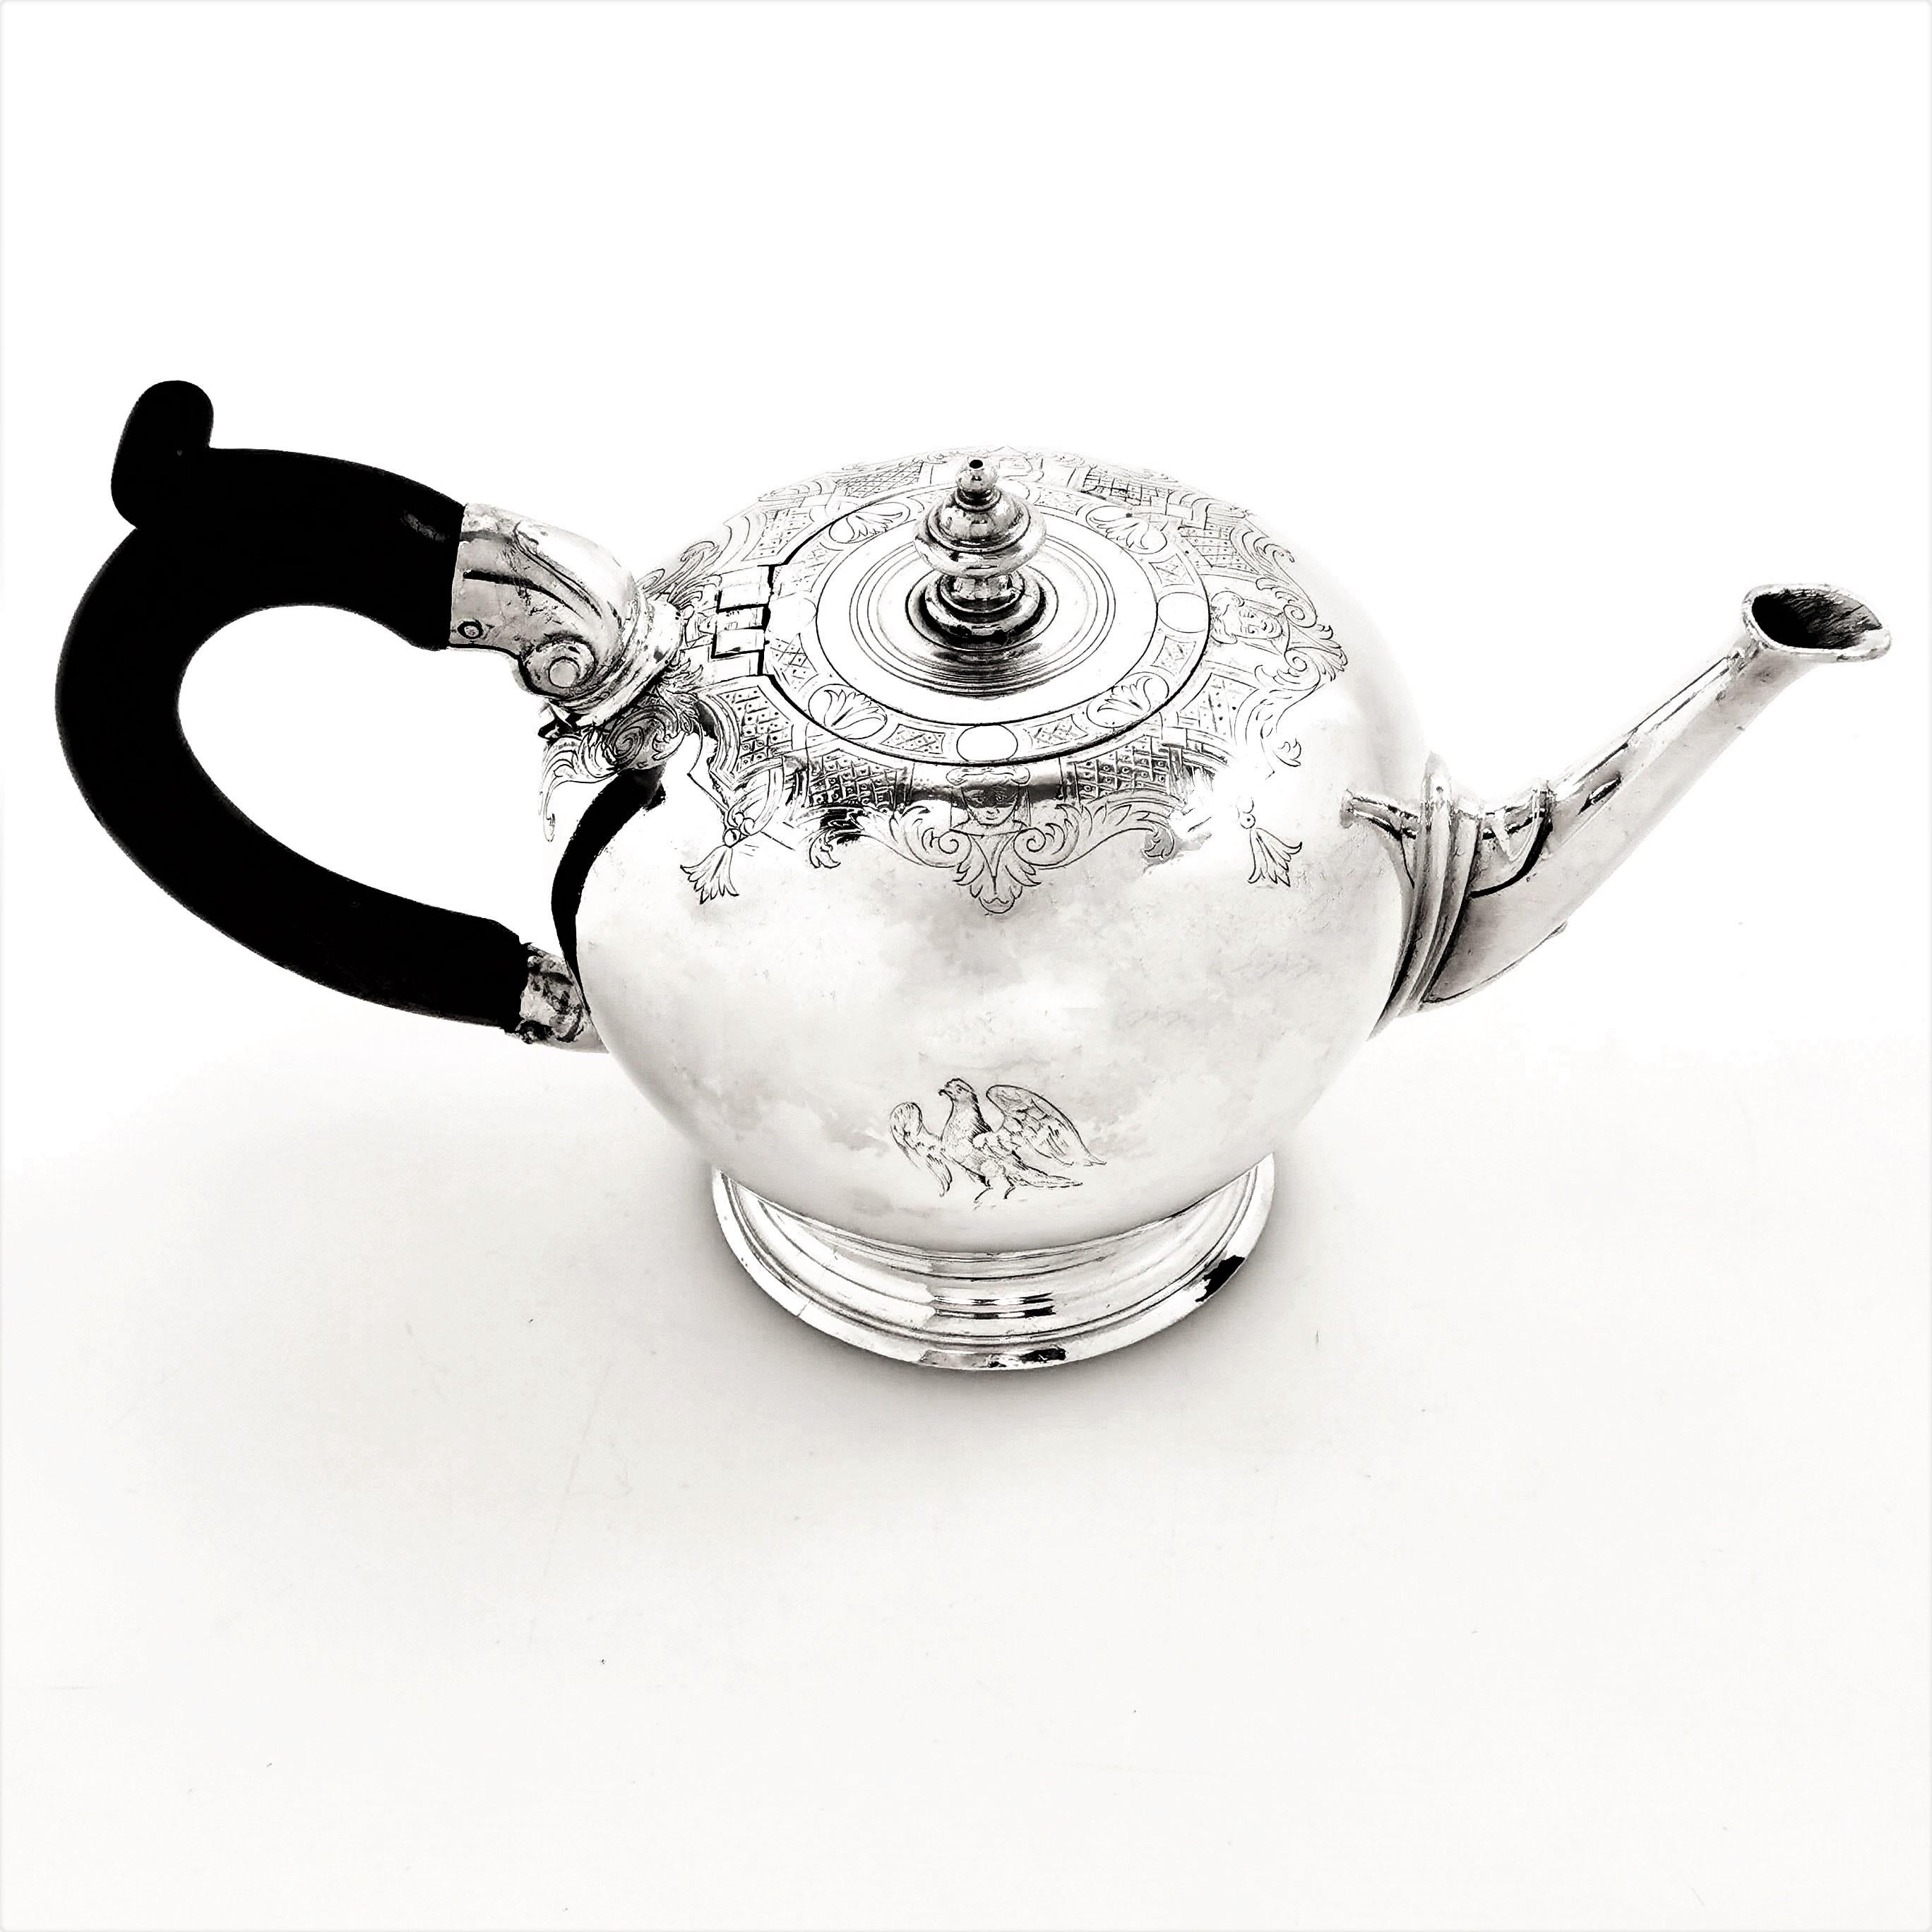 A beautiful Antique George I sterling Silver Teapot featuring a lovely delicate engraved band where the body and lid meet. This early Georgian Bachelor sized Teapot has a wooden handle and stands on a spread foot. The Teapot has a small crest